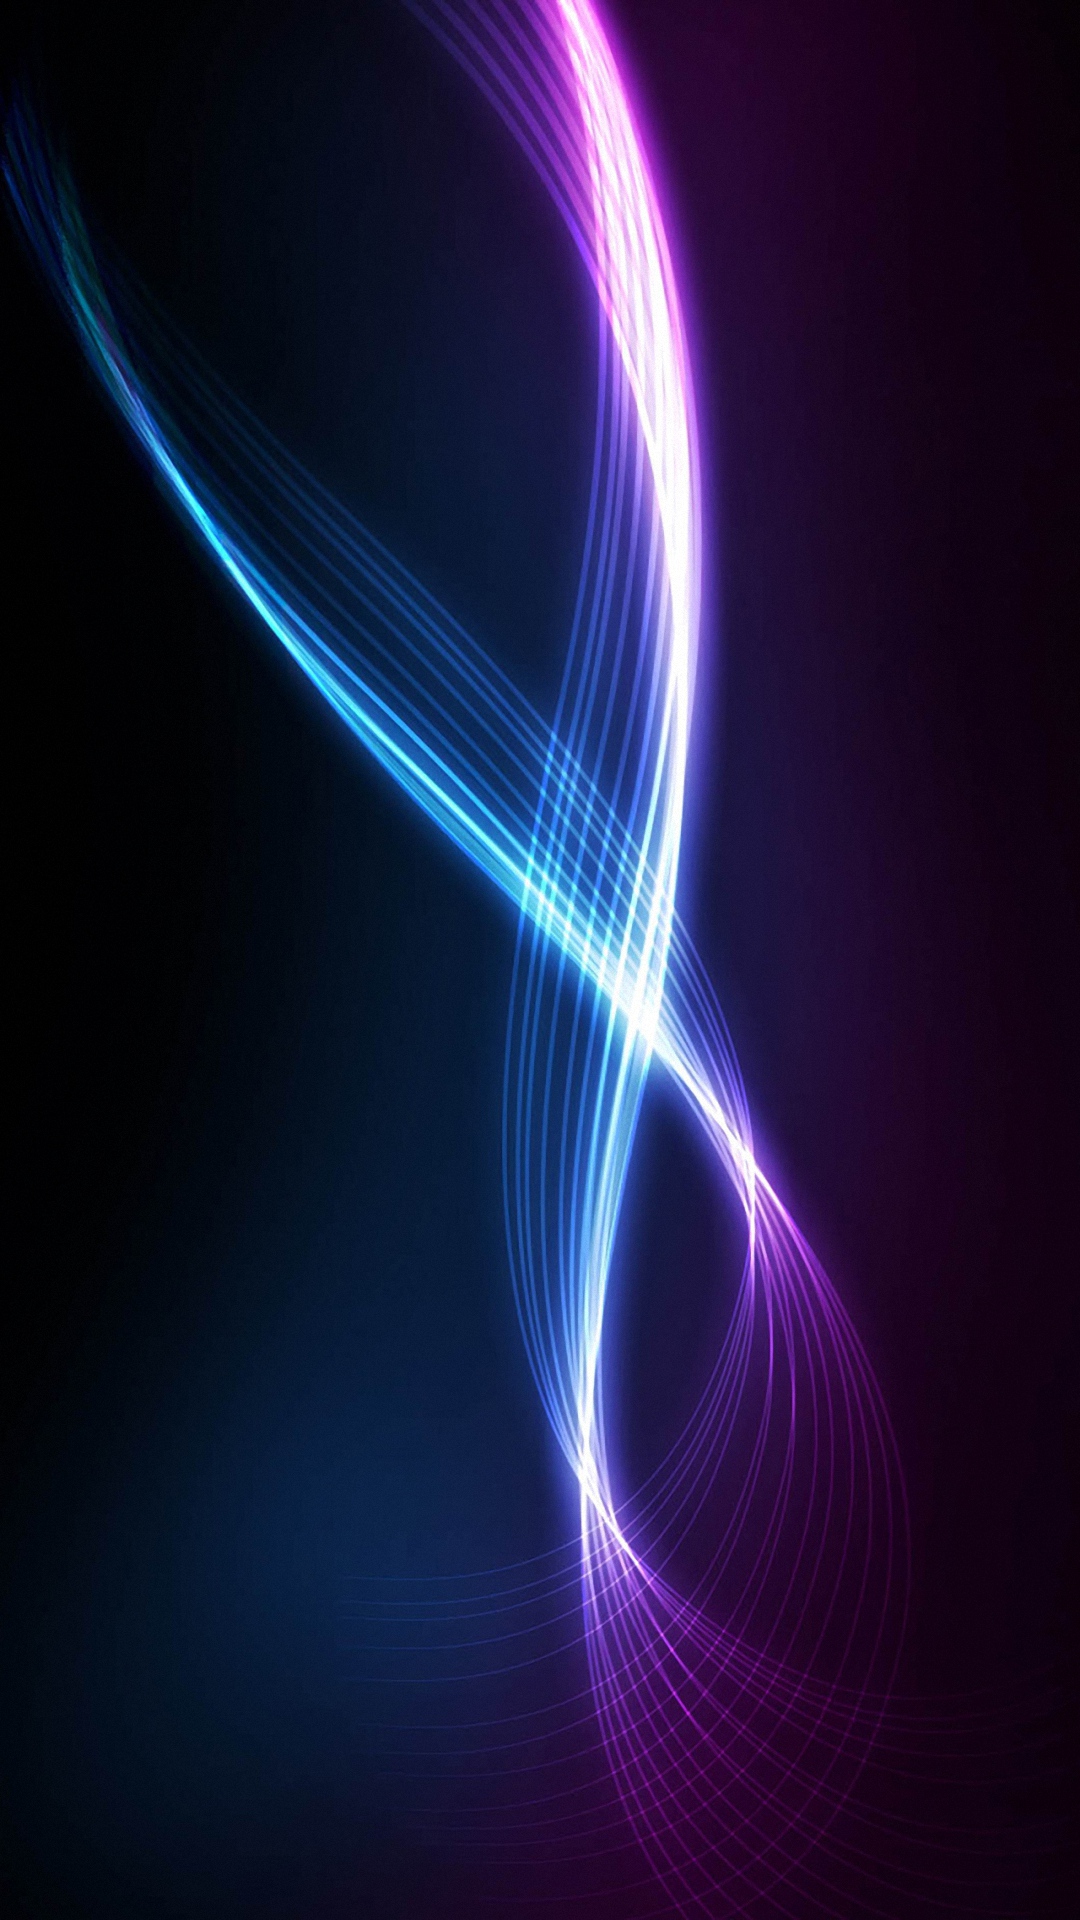 download blue violet stream beam wallpaper for samsung galaxy s4 s5